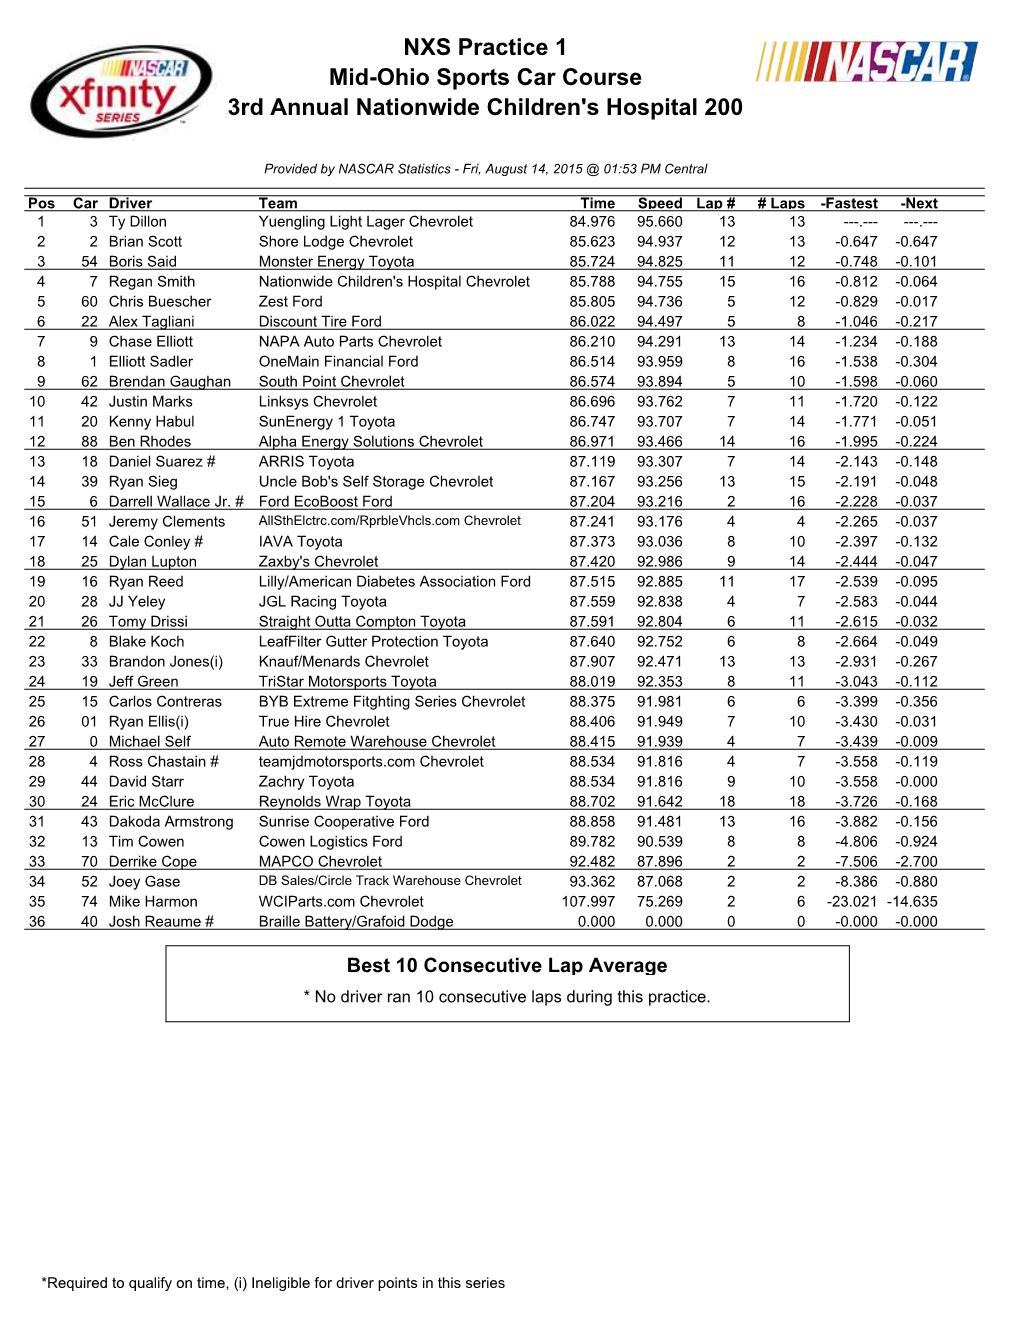 NXS Practice 1 Mid-Ohio Sports Car Course 3Rd Annual Nationwide Children's Hospital 200